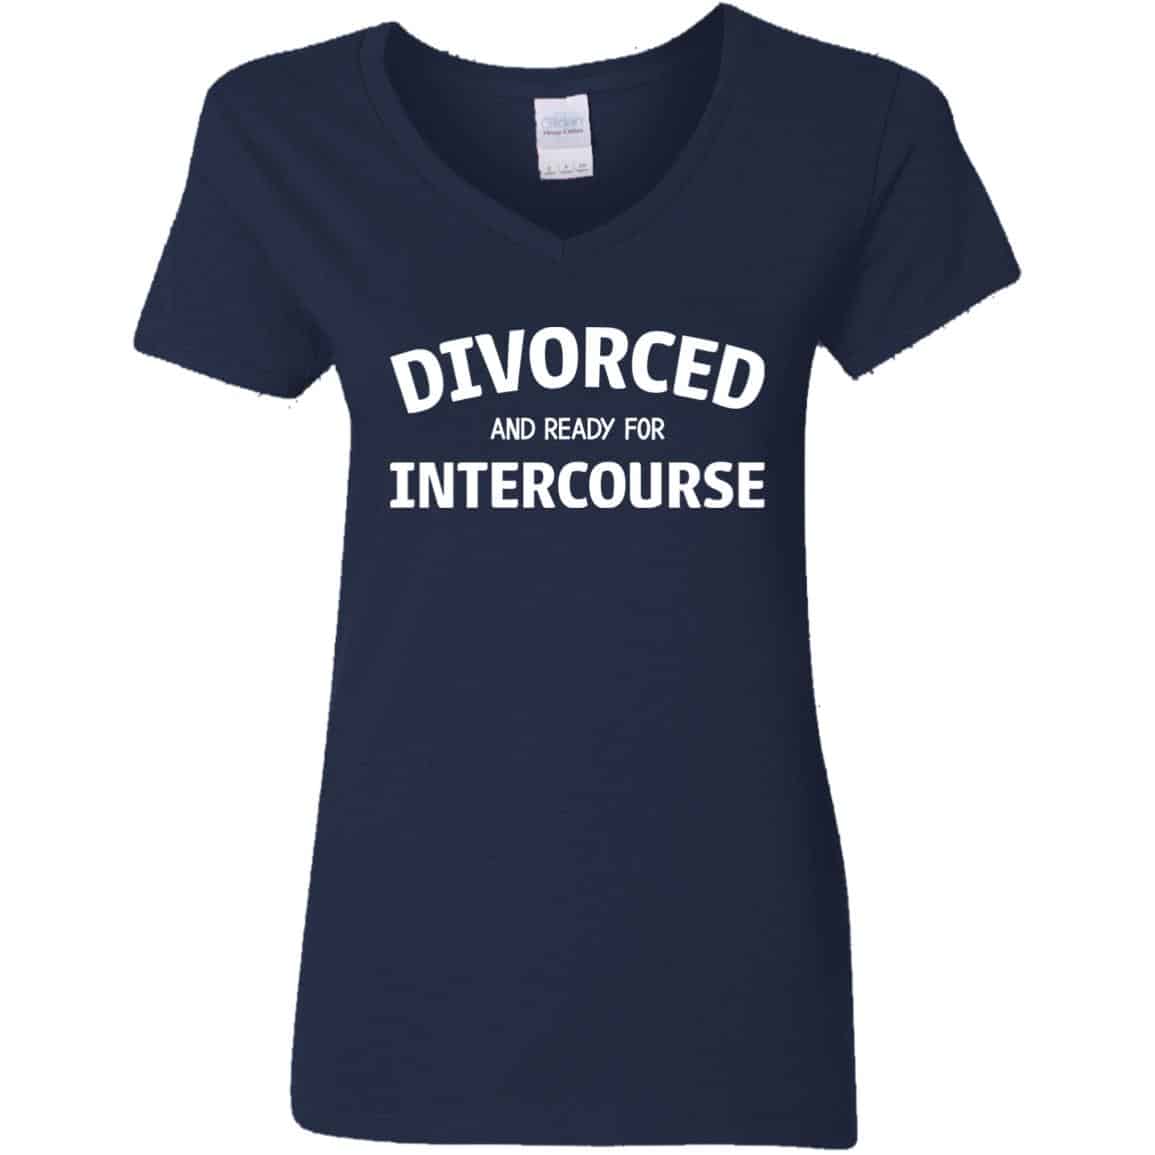 Women's V-neck divorced and ready for intercourse blue t-shirt